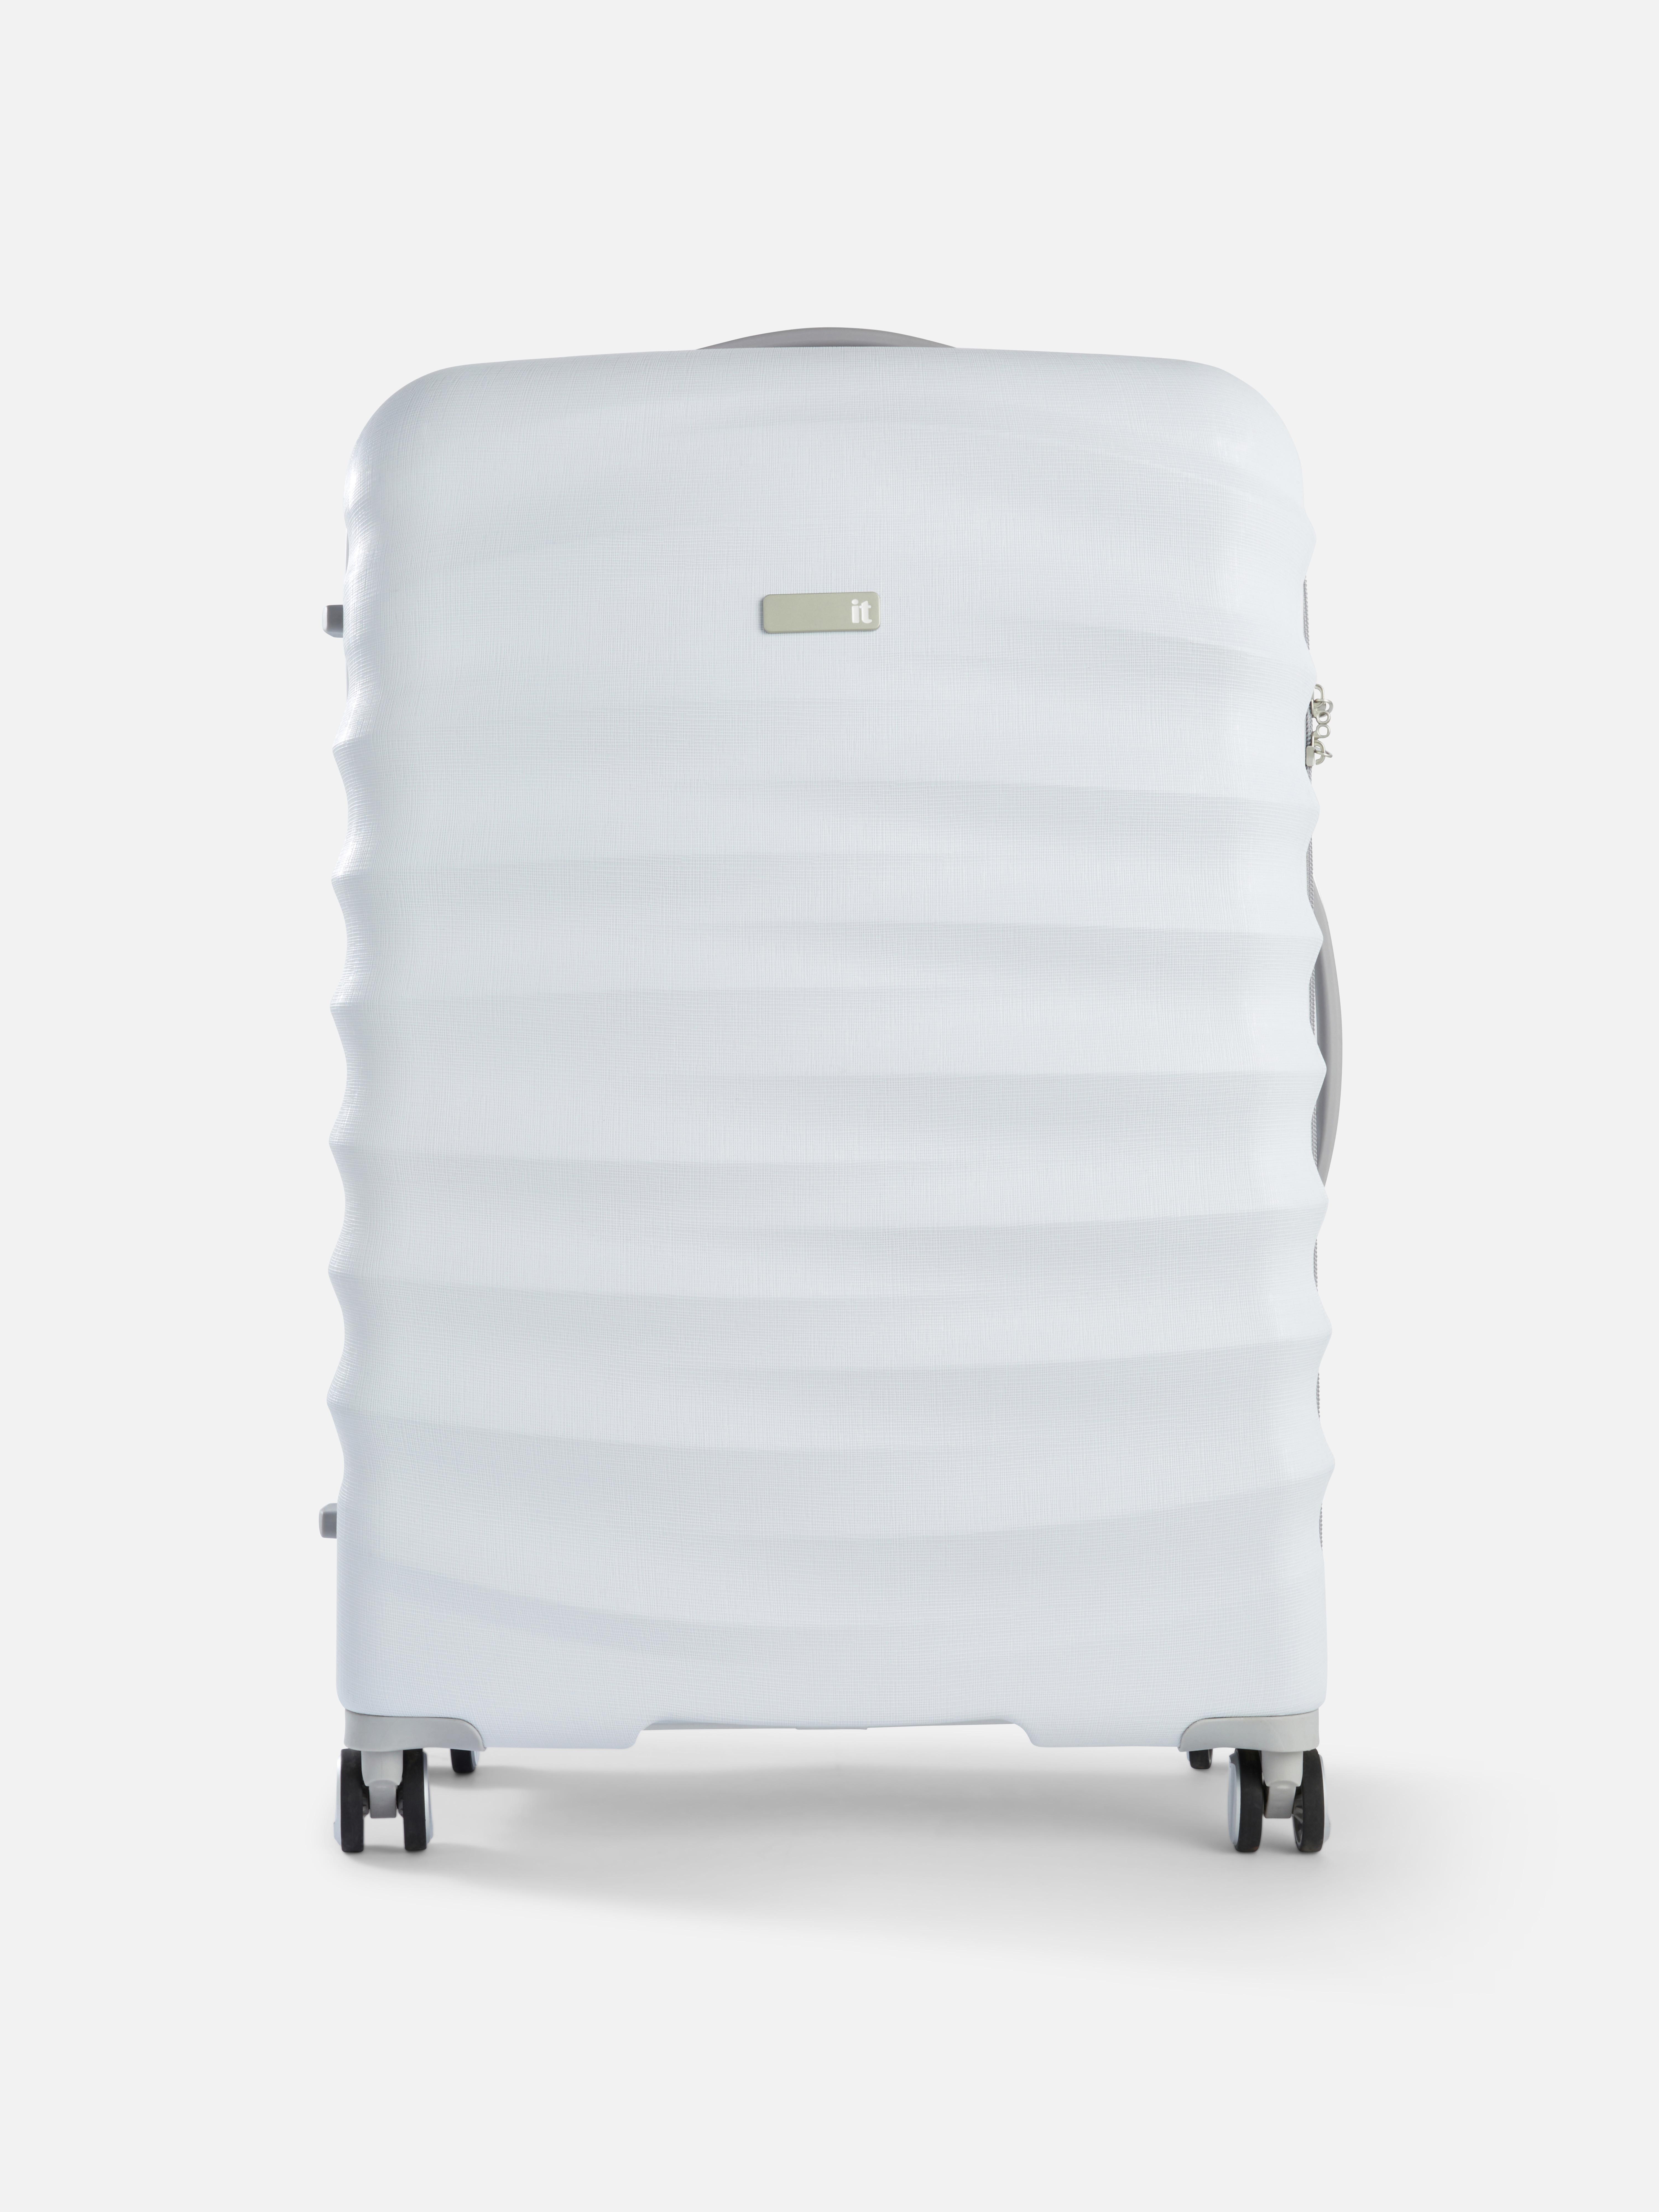 Textured Hard Shell Travel Suitcase White